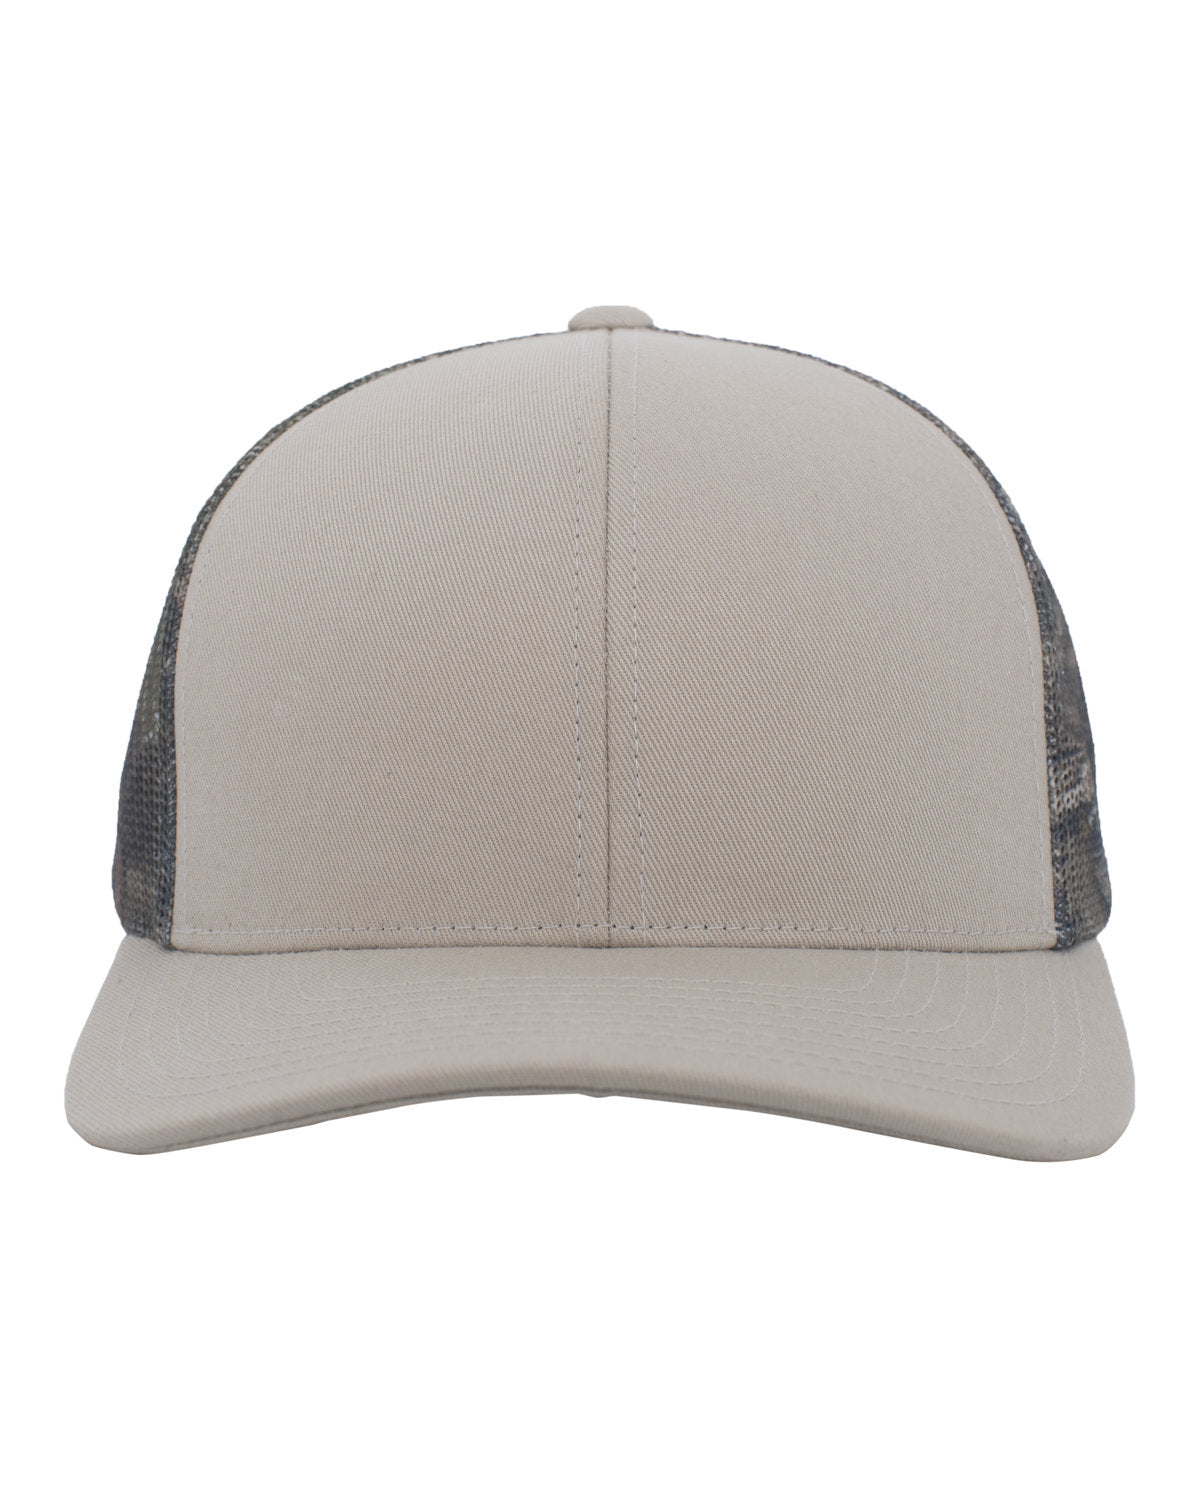 108C-PacificHeadwear-CO-STN_BRKUPCNTRY-OS